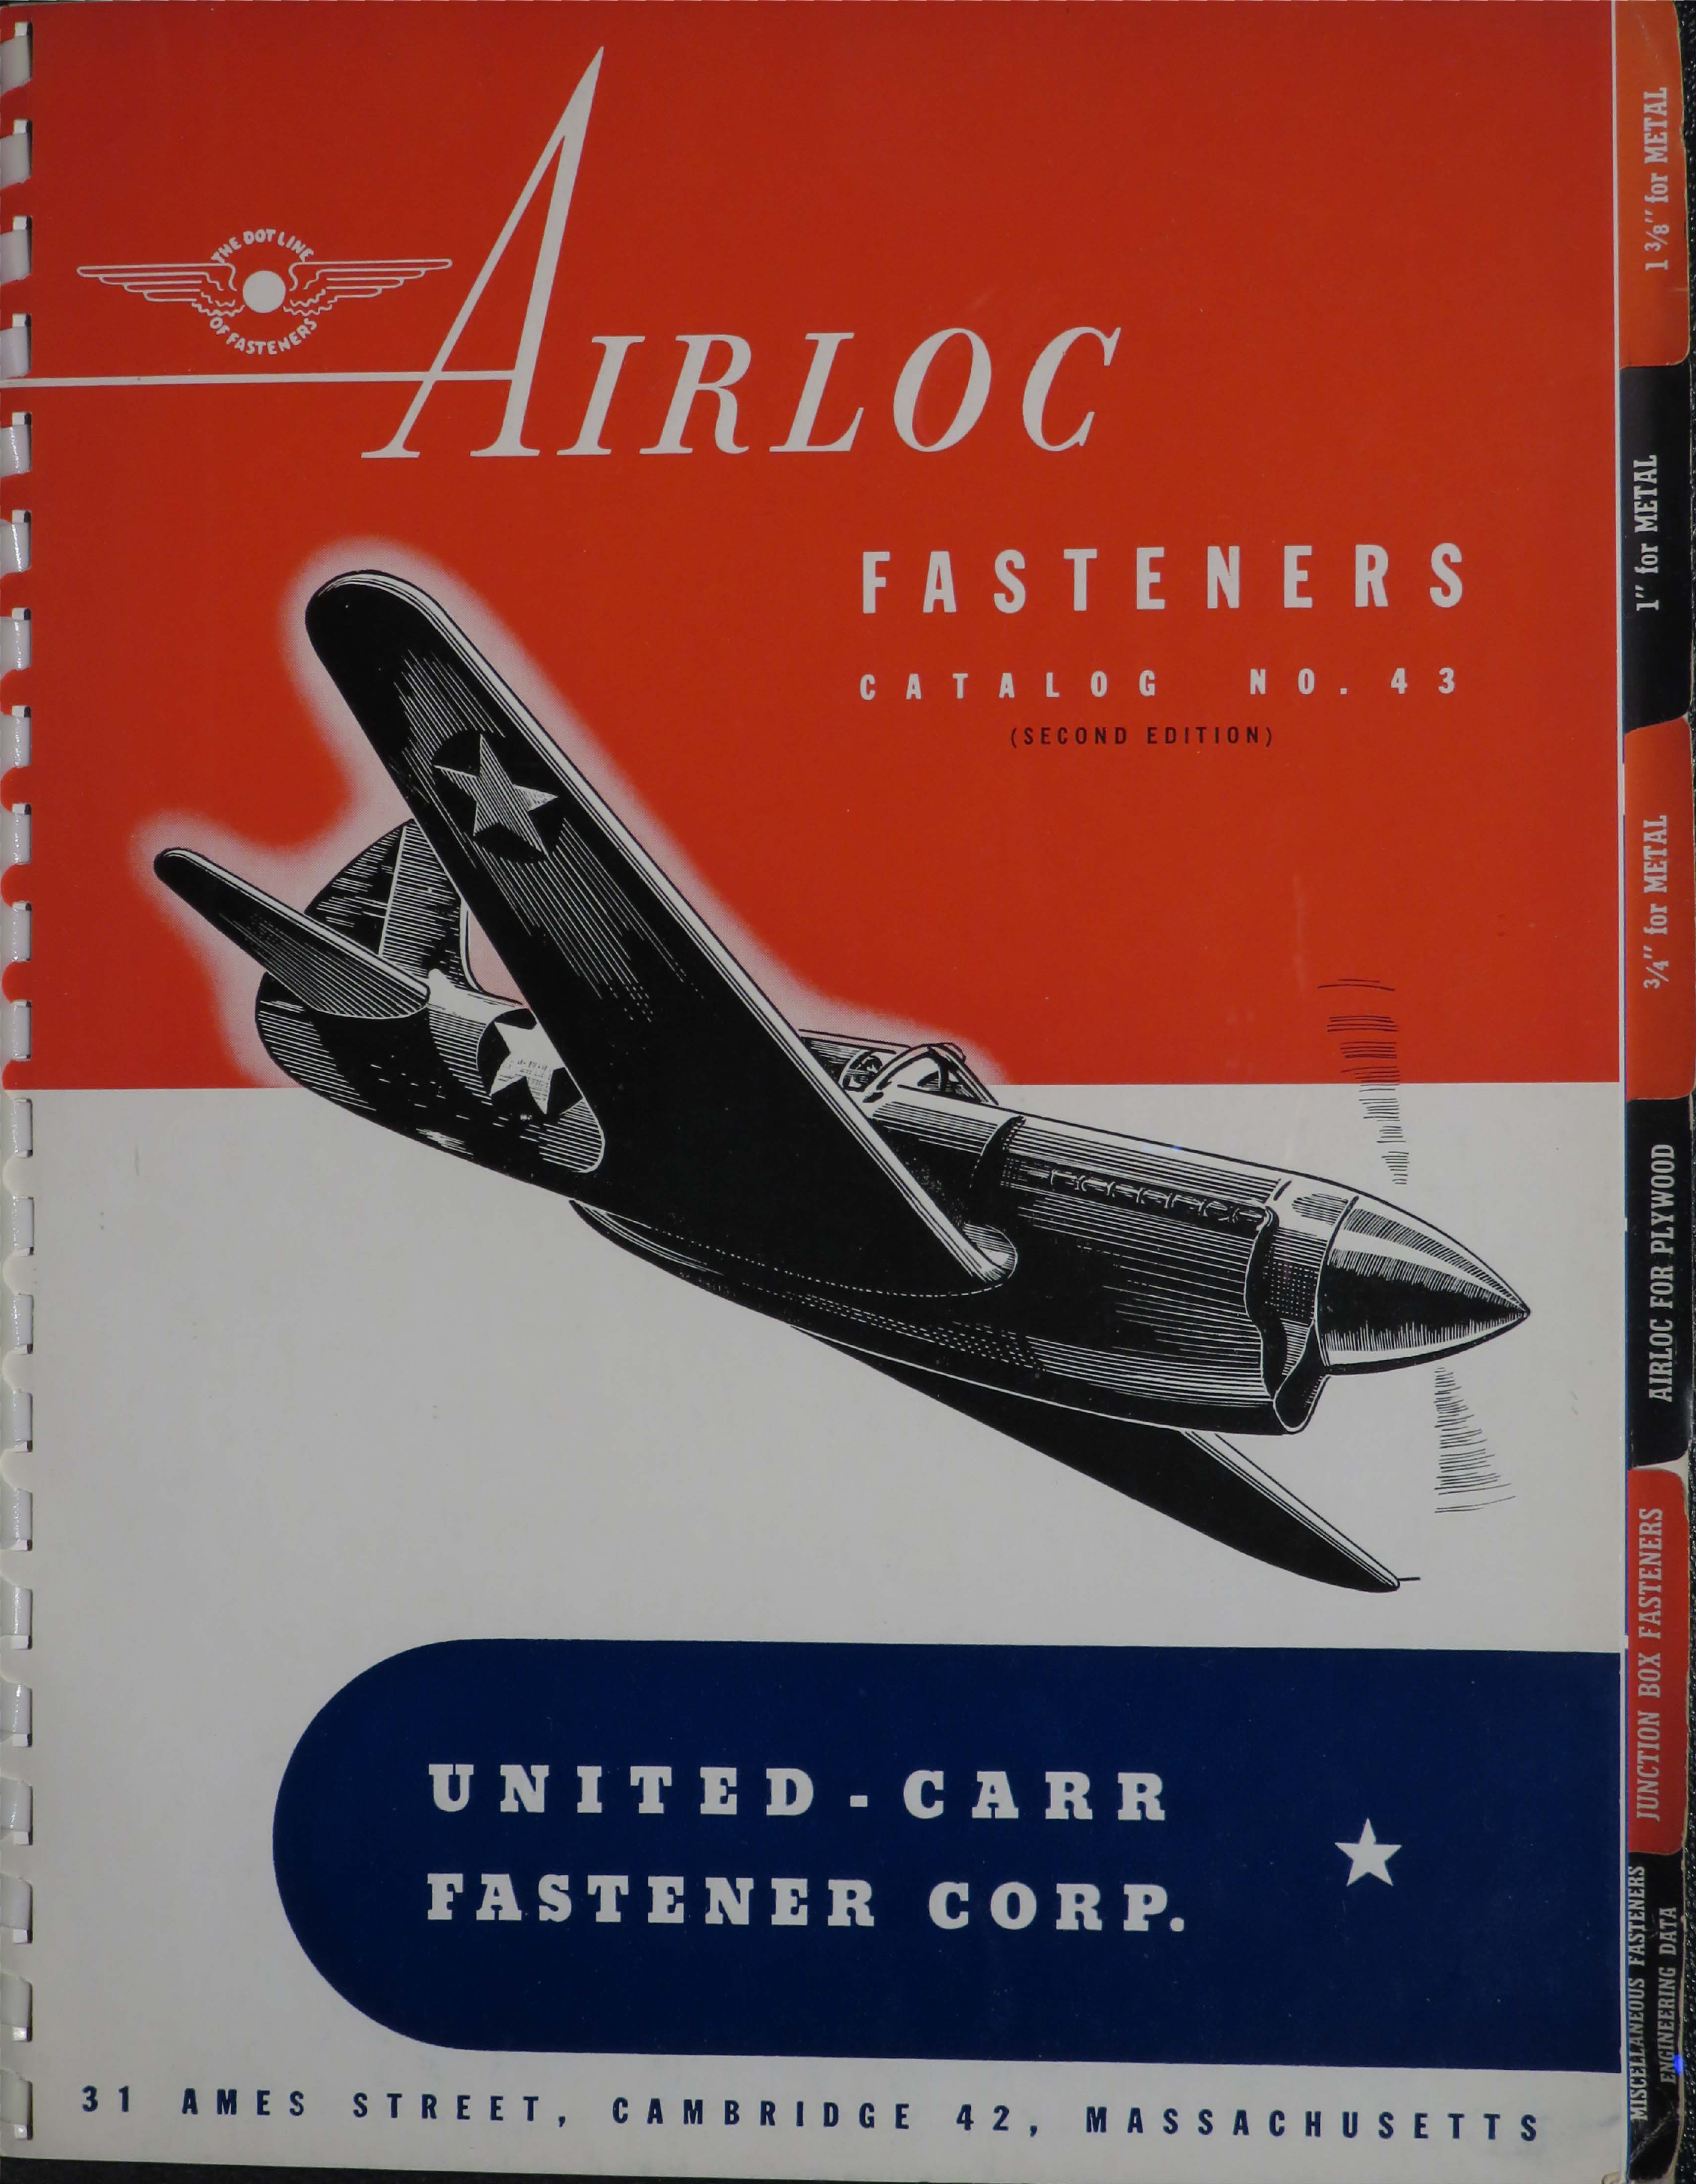 Sample page 1 from AirCorps Library document: Airloc Fasteners